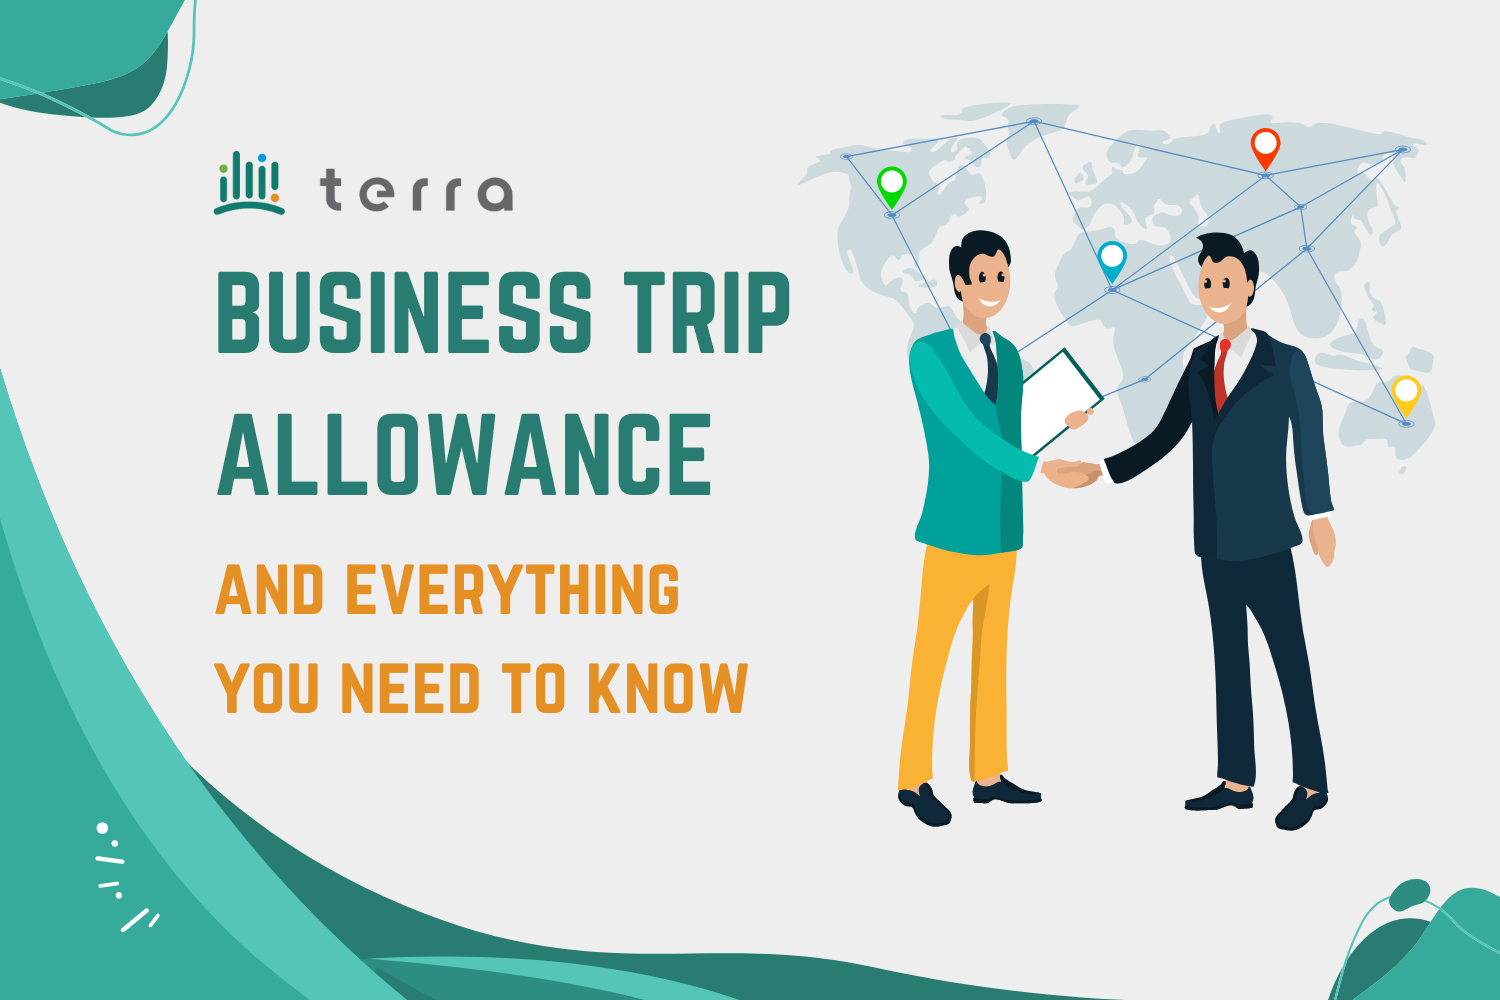 Business trip allowance and everything you need to know